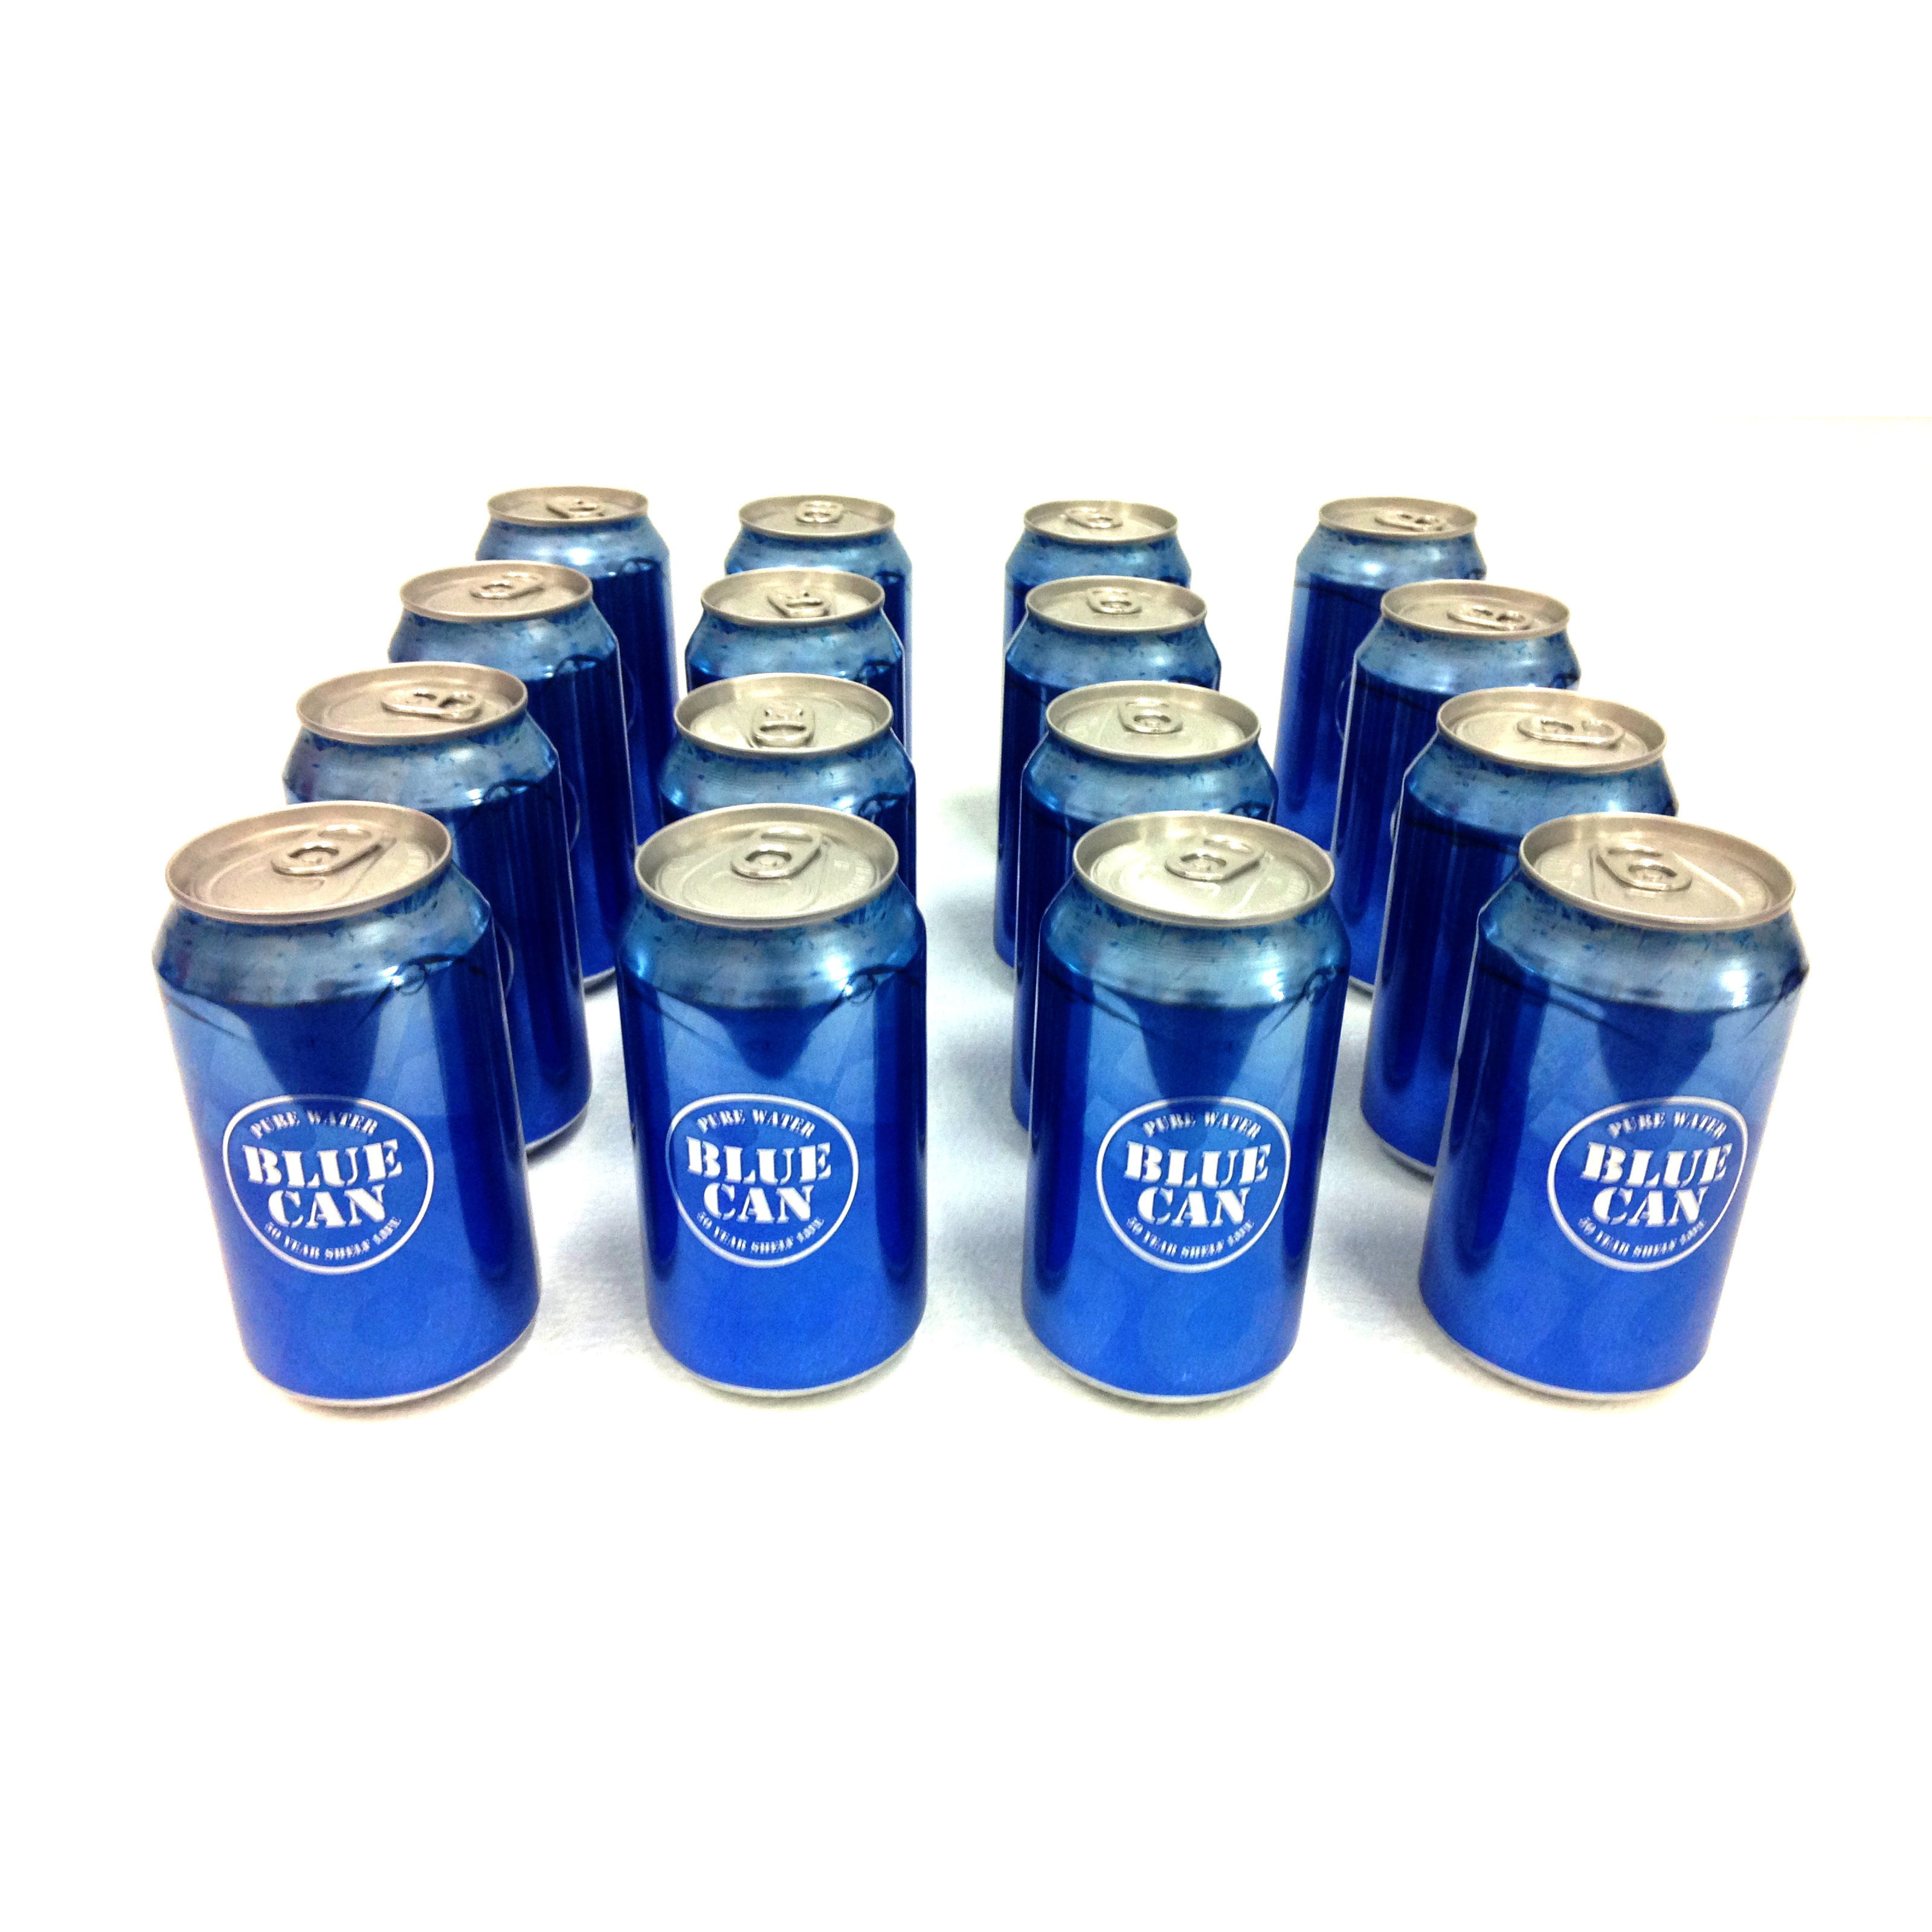 Case of 24 Cans of Blue Can Emergency Survival Drinking Water 50 Year Shelf  Life